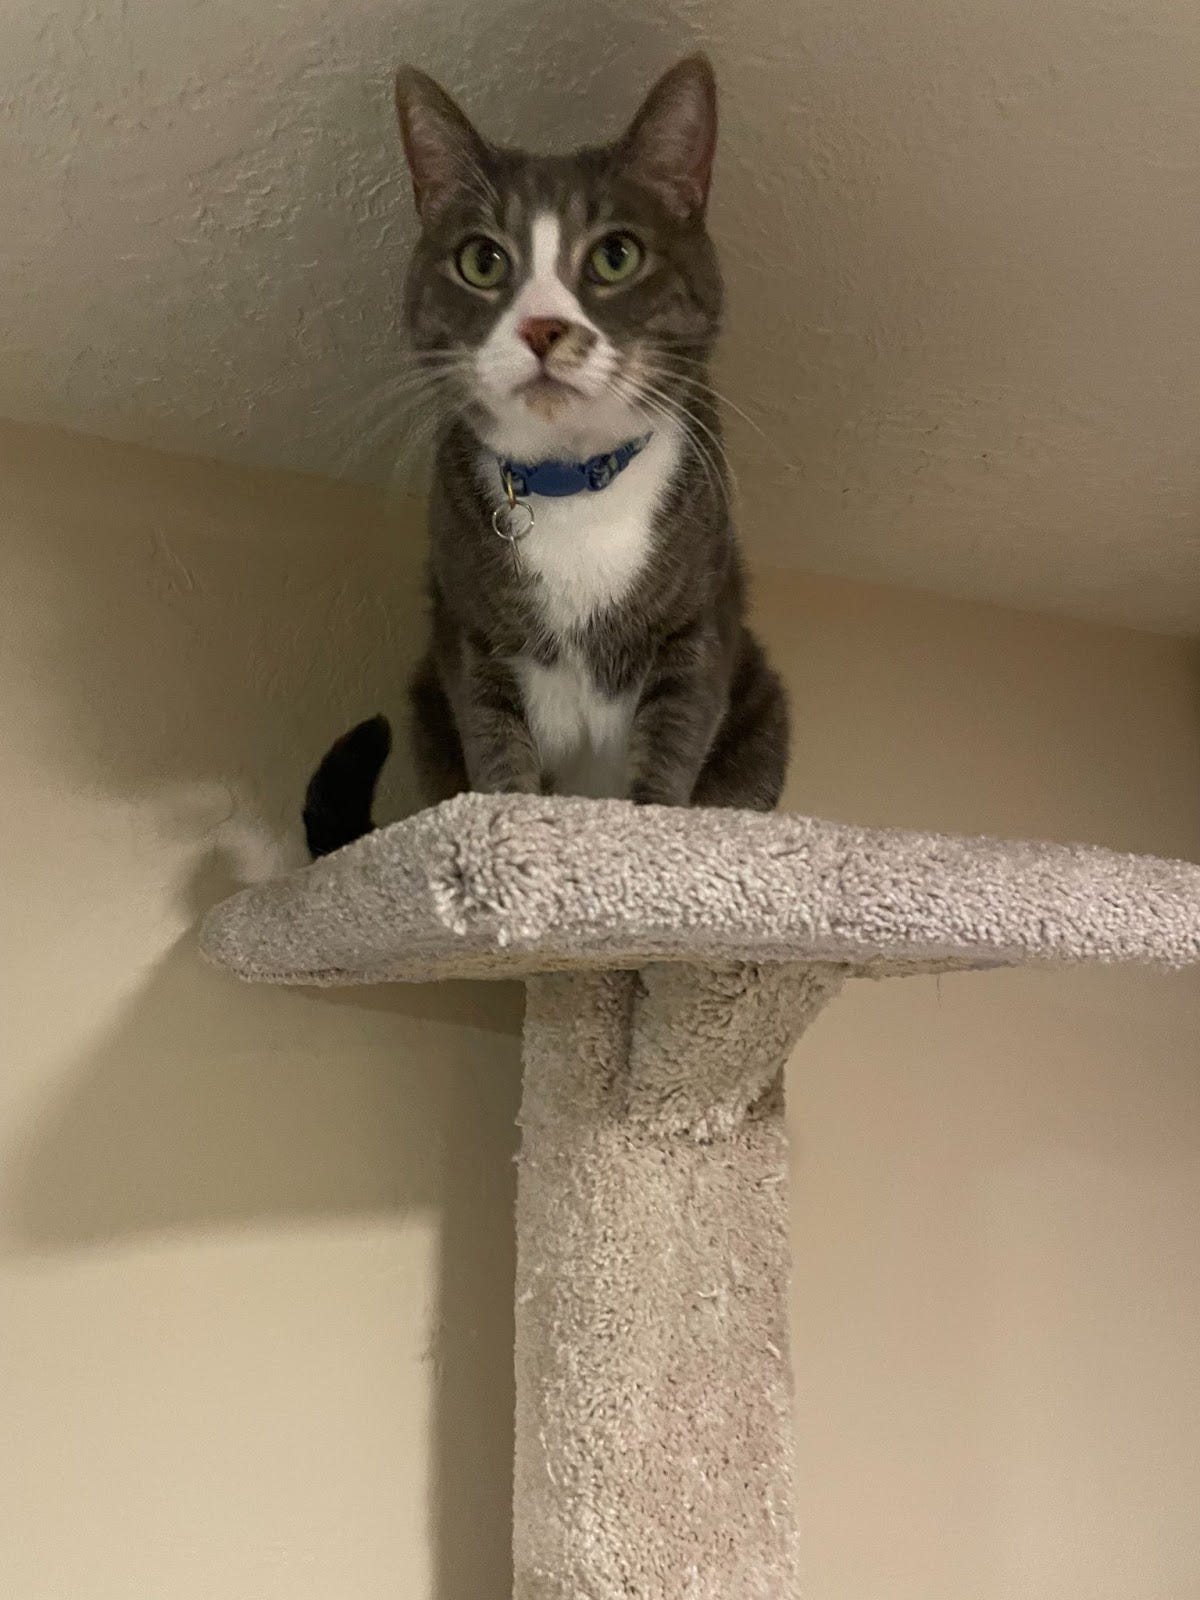 A gray/brown tabby cat with a white belly sits at the top of a beige cat tree